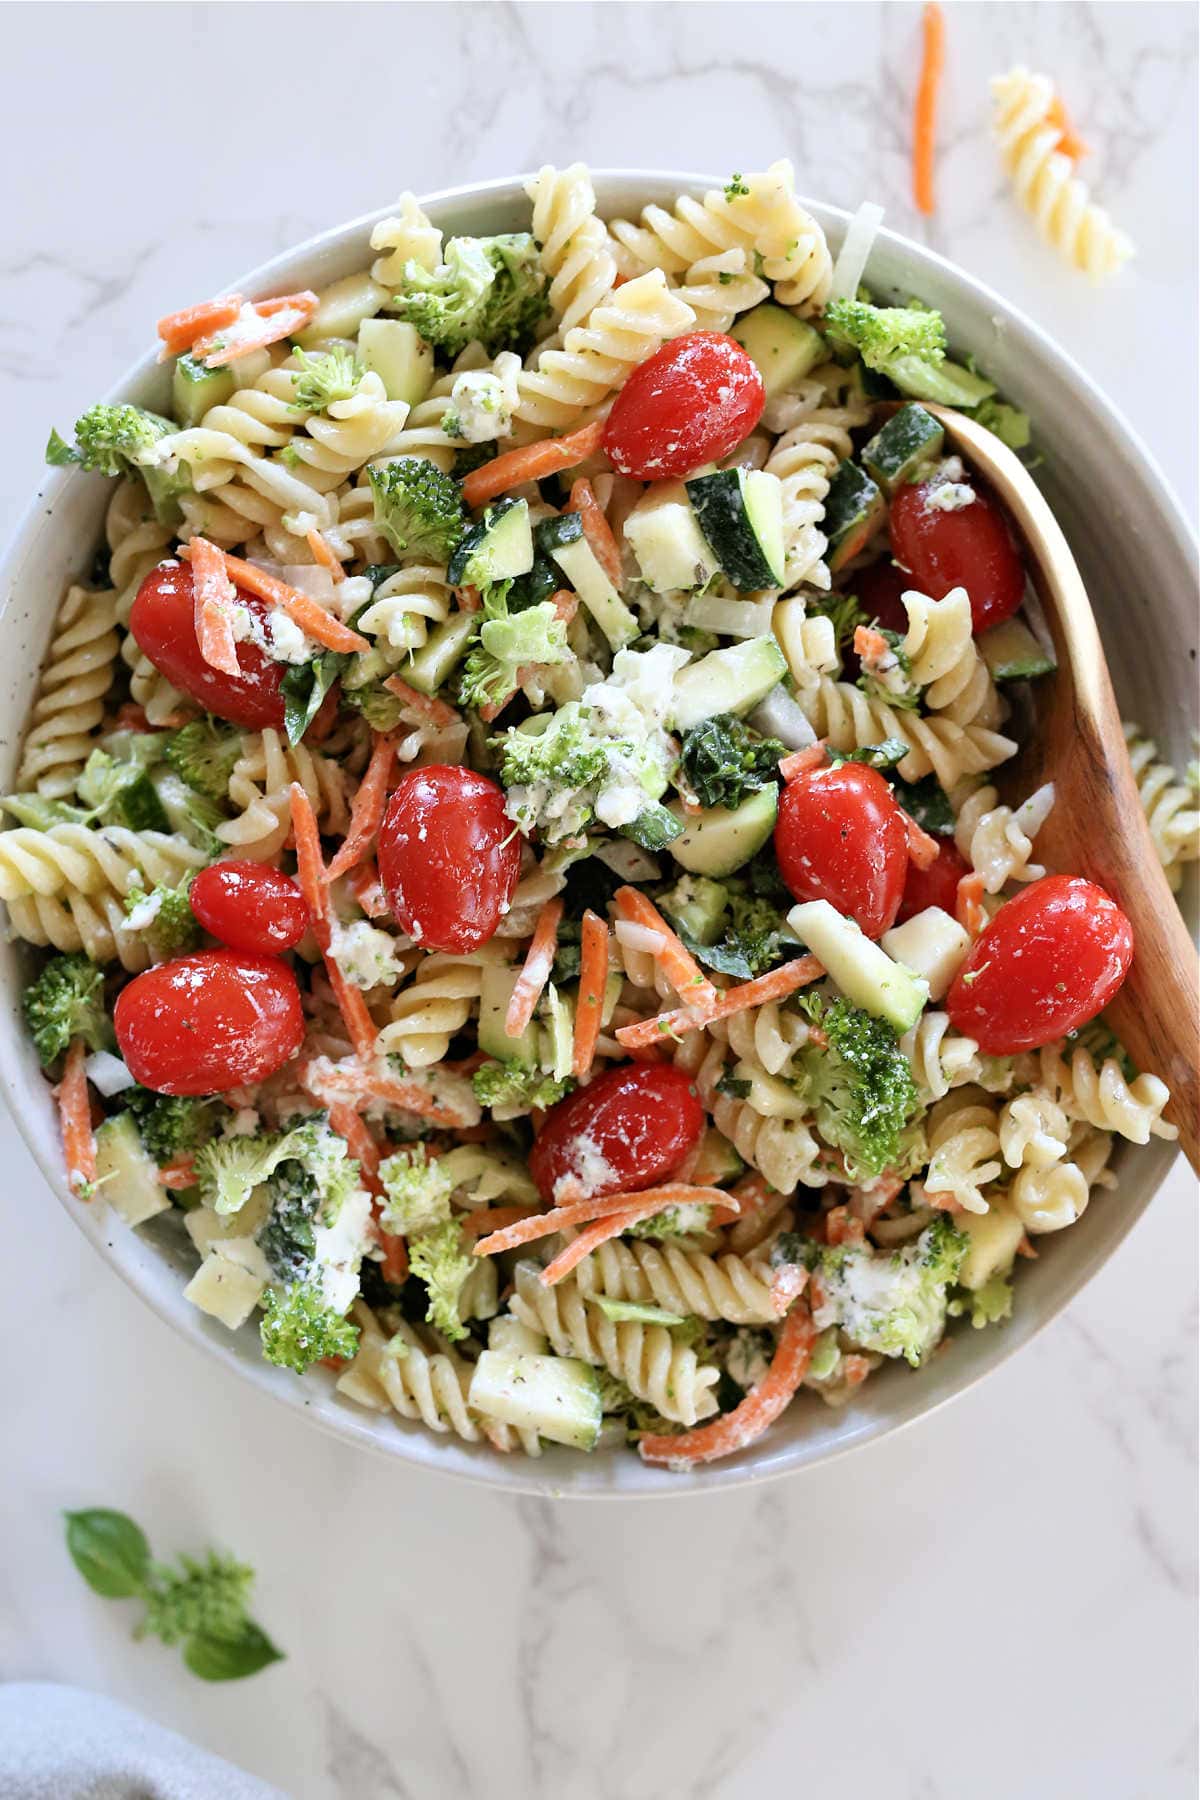 Mixed cold pasta salad with gluten-free noodles, fresh vegetables, and goat cheese.